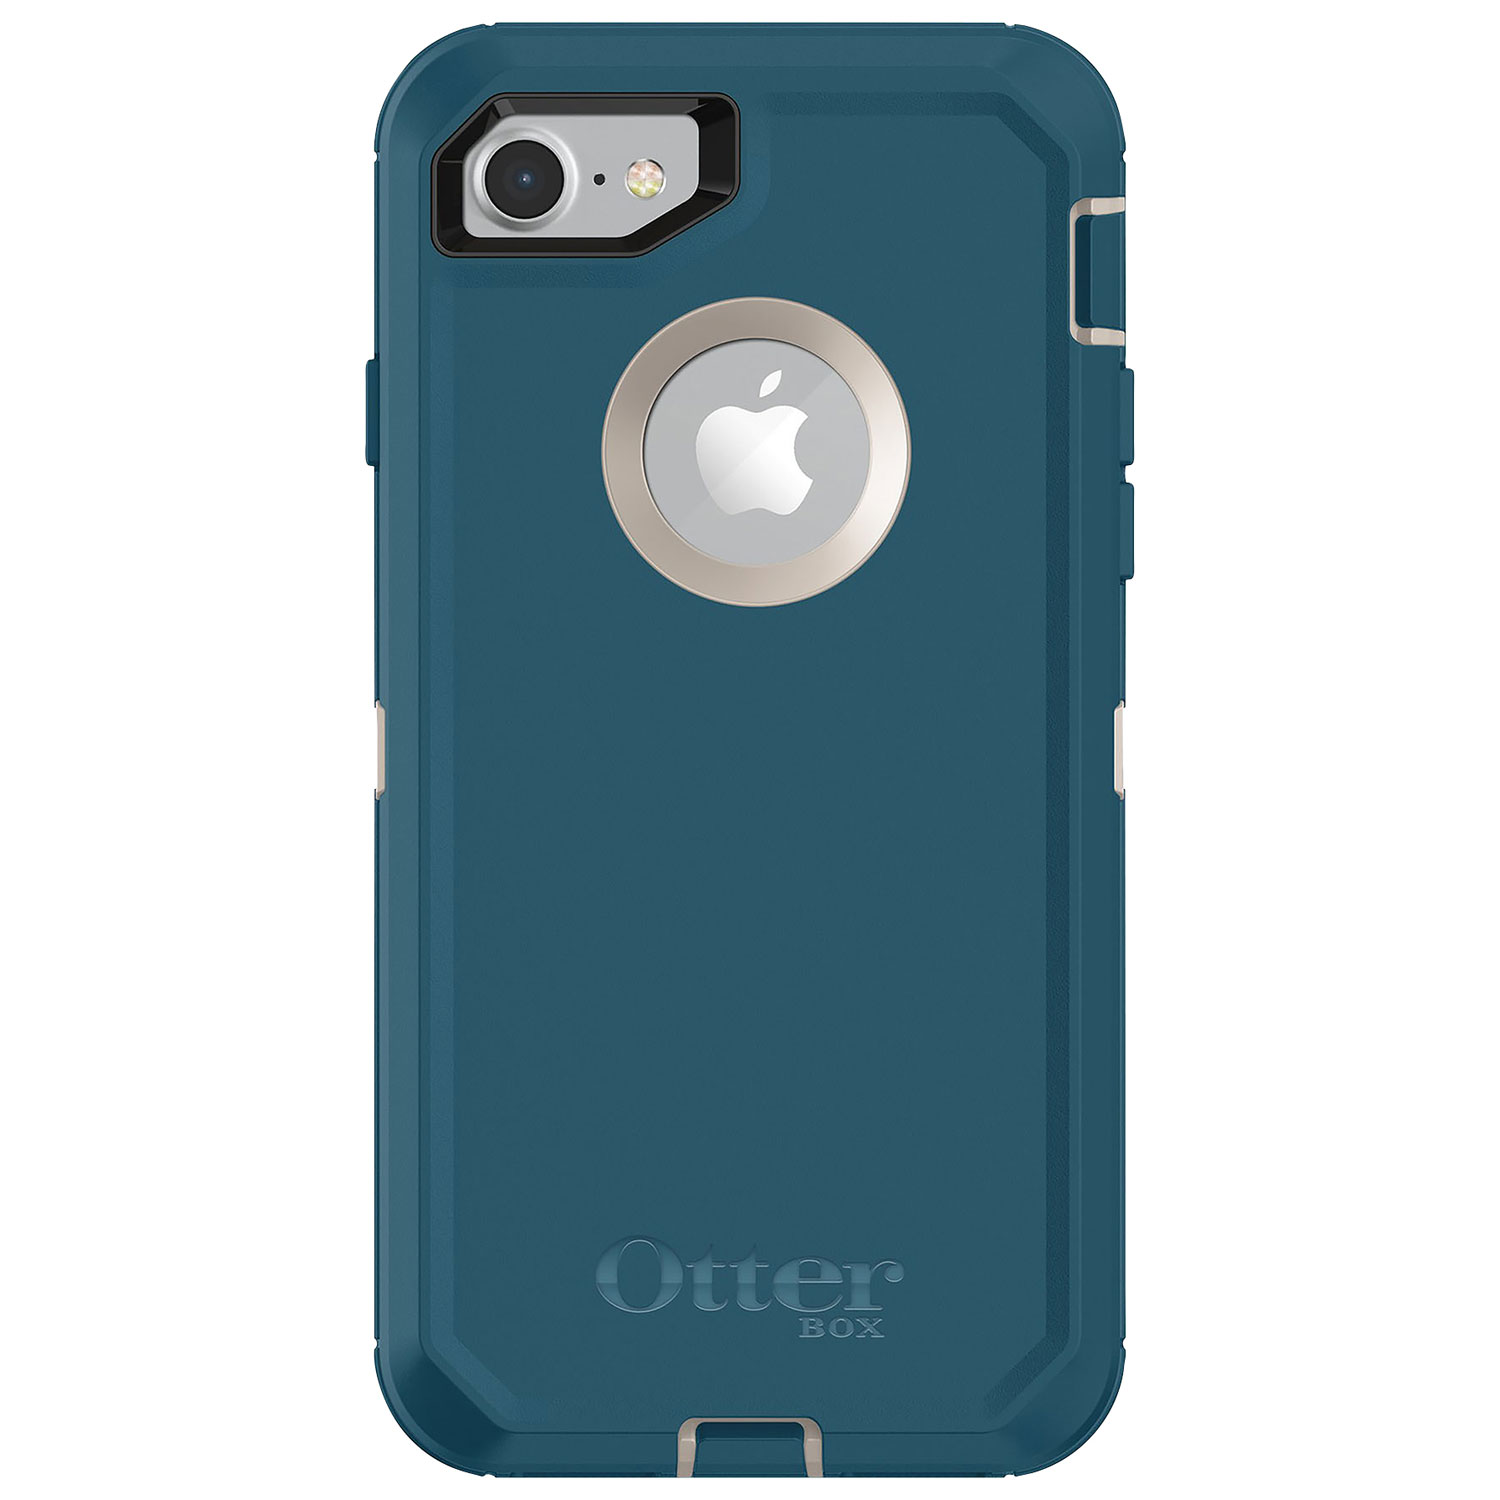 OtterBox Defender Fitted Hard Shell Case for iPhone SE (2nd Gen)/8/7 - Big Sur